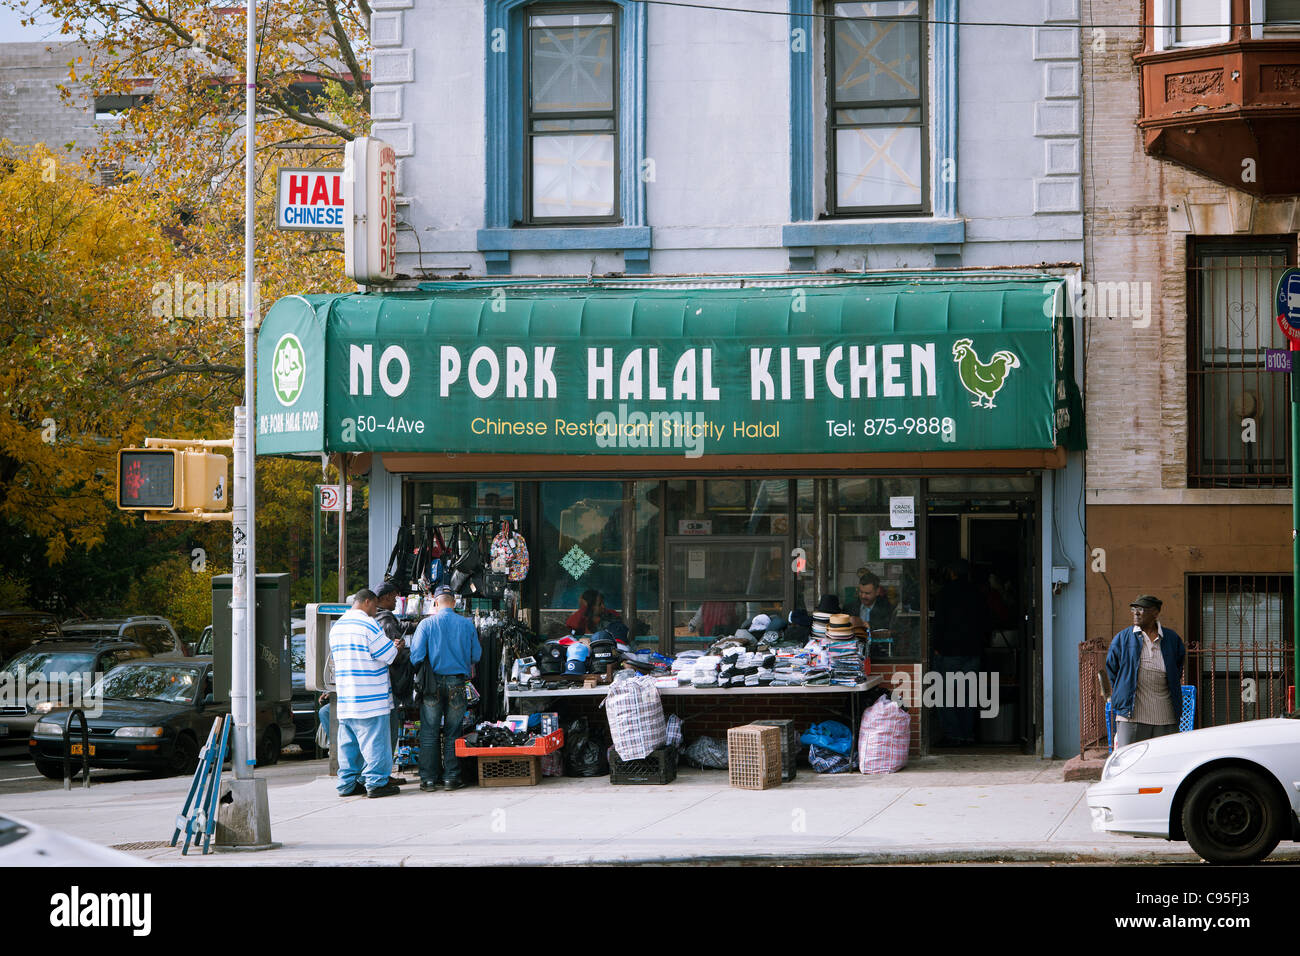 The No Pork Halal Kitchen Chinese restaurant of of Atlantic Avenue in